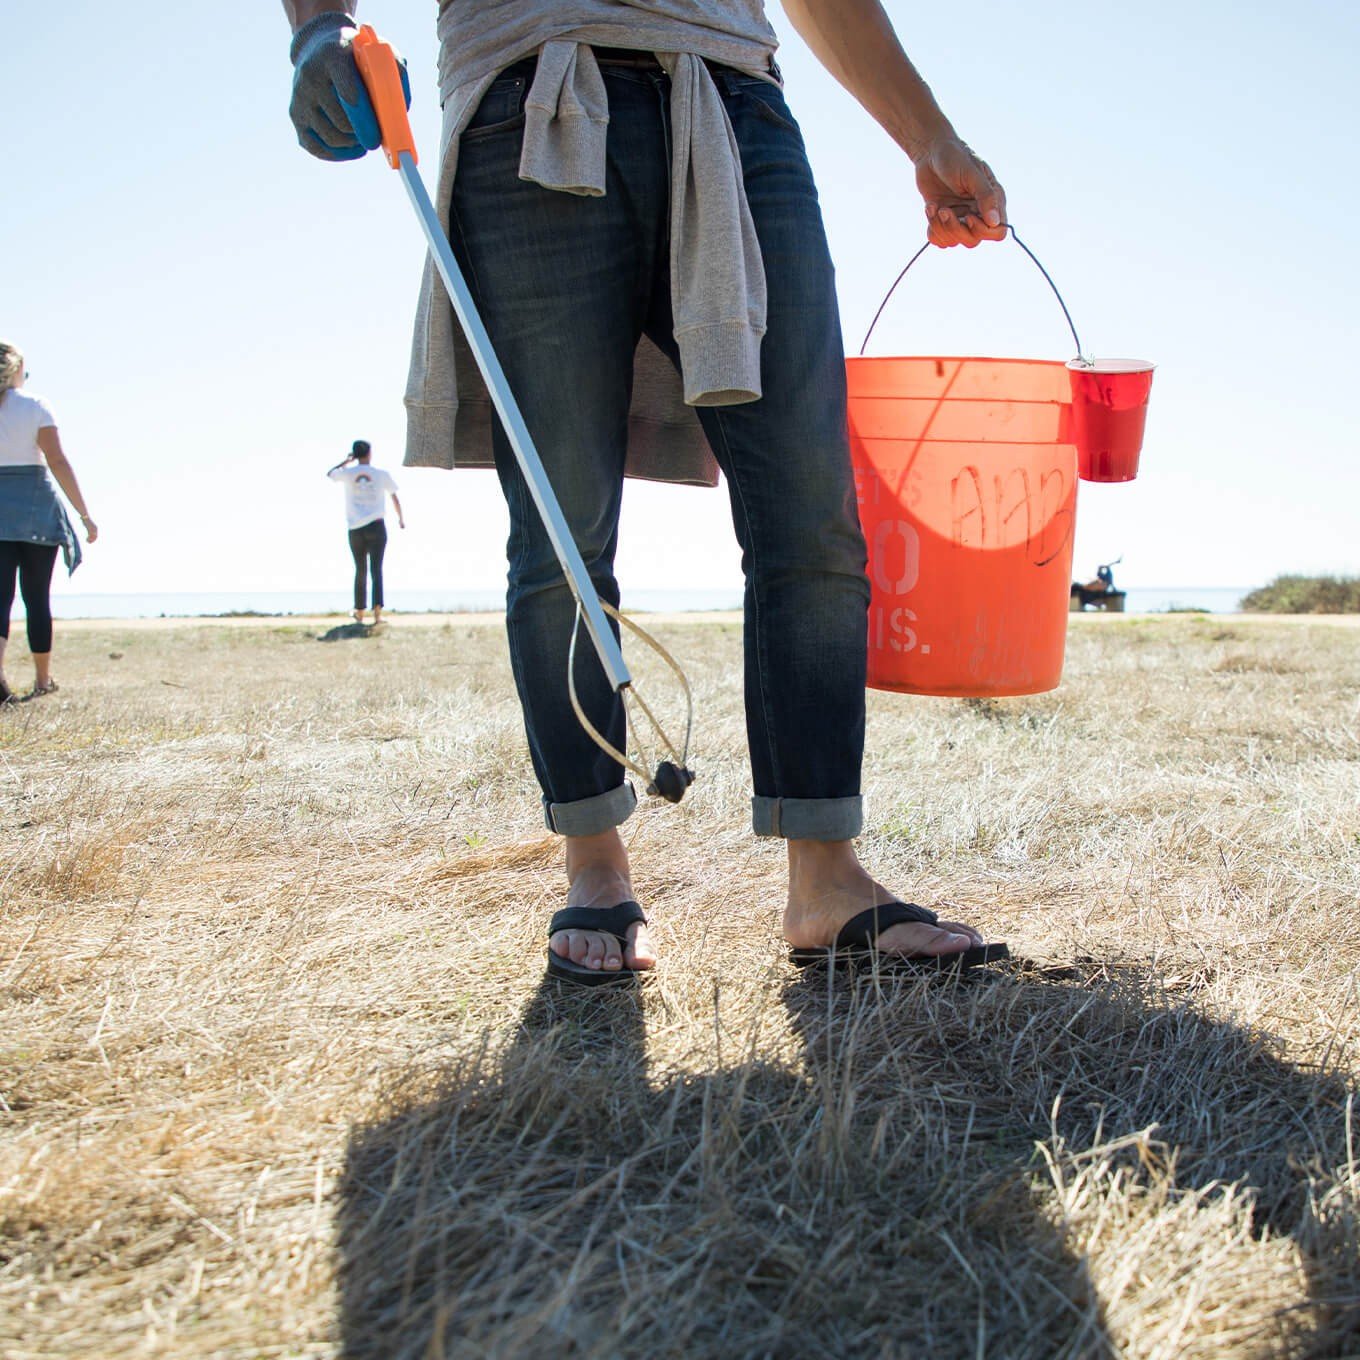 Surfrider-Beach-Cleanups-person-holding-trash-grabber-and-bucket-picking-up-garbage